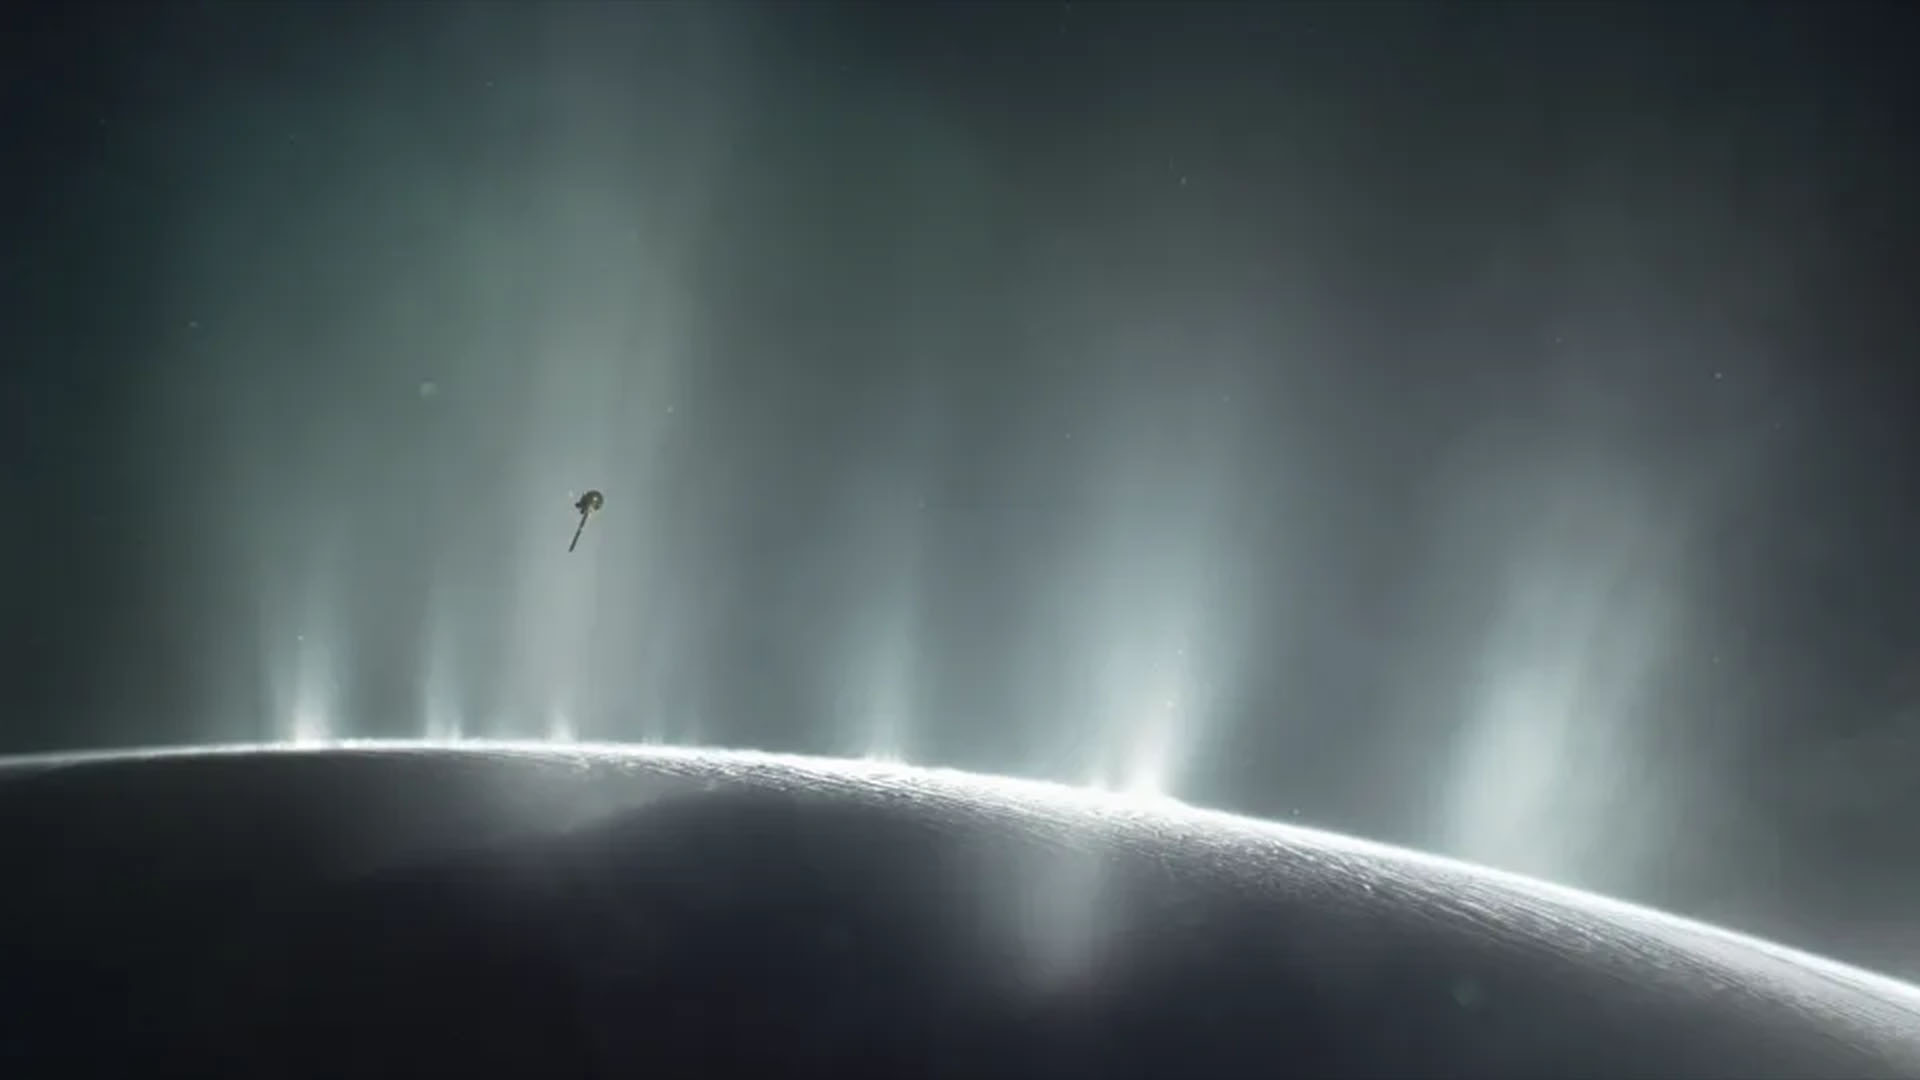 This still is from a short computer-animated film that highlights Cassini's accomplishments and Saturn and reveals the science-packed final orbits between April and September 2017.